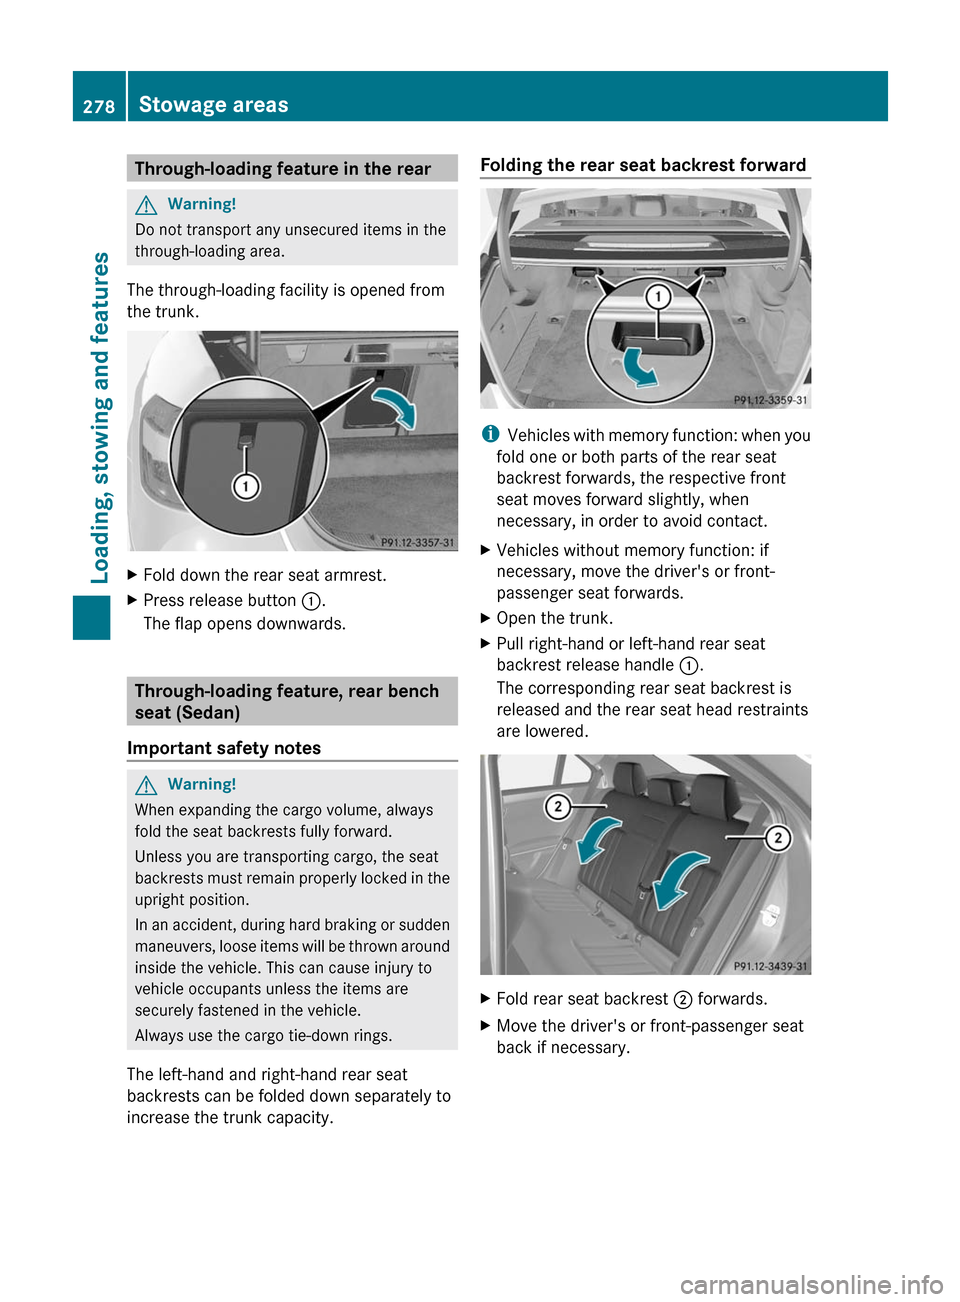 MERCEDES-BENZ E350 4MATIC 2011 W212 User Guide Through-loading feature in the rearGWarning!
Do not transport any unsecured items in the
through-loading area.
The through-loading facility is opened from
the trunk.
XFold down the rear seat armrest.X